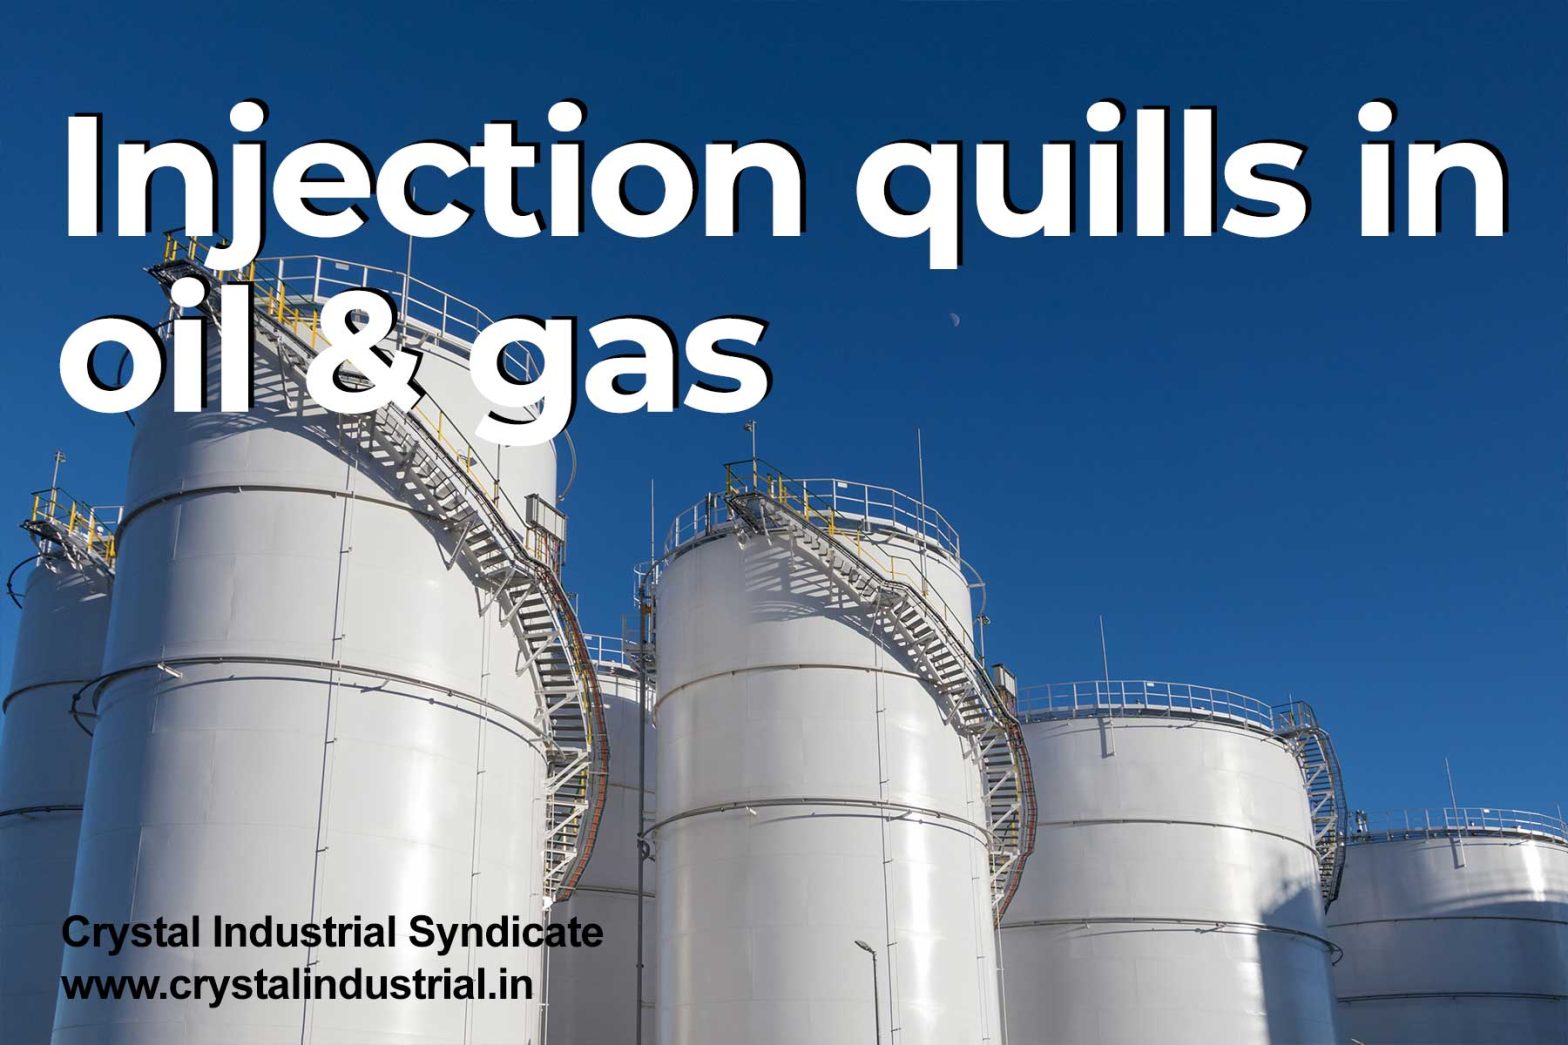 How are injection quills used in the oil and gas industry?